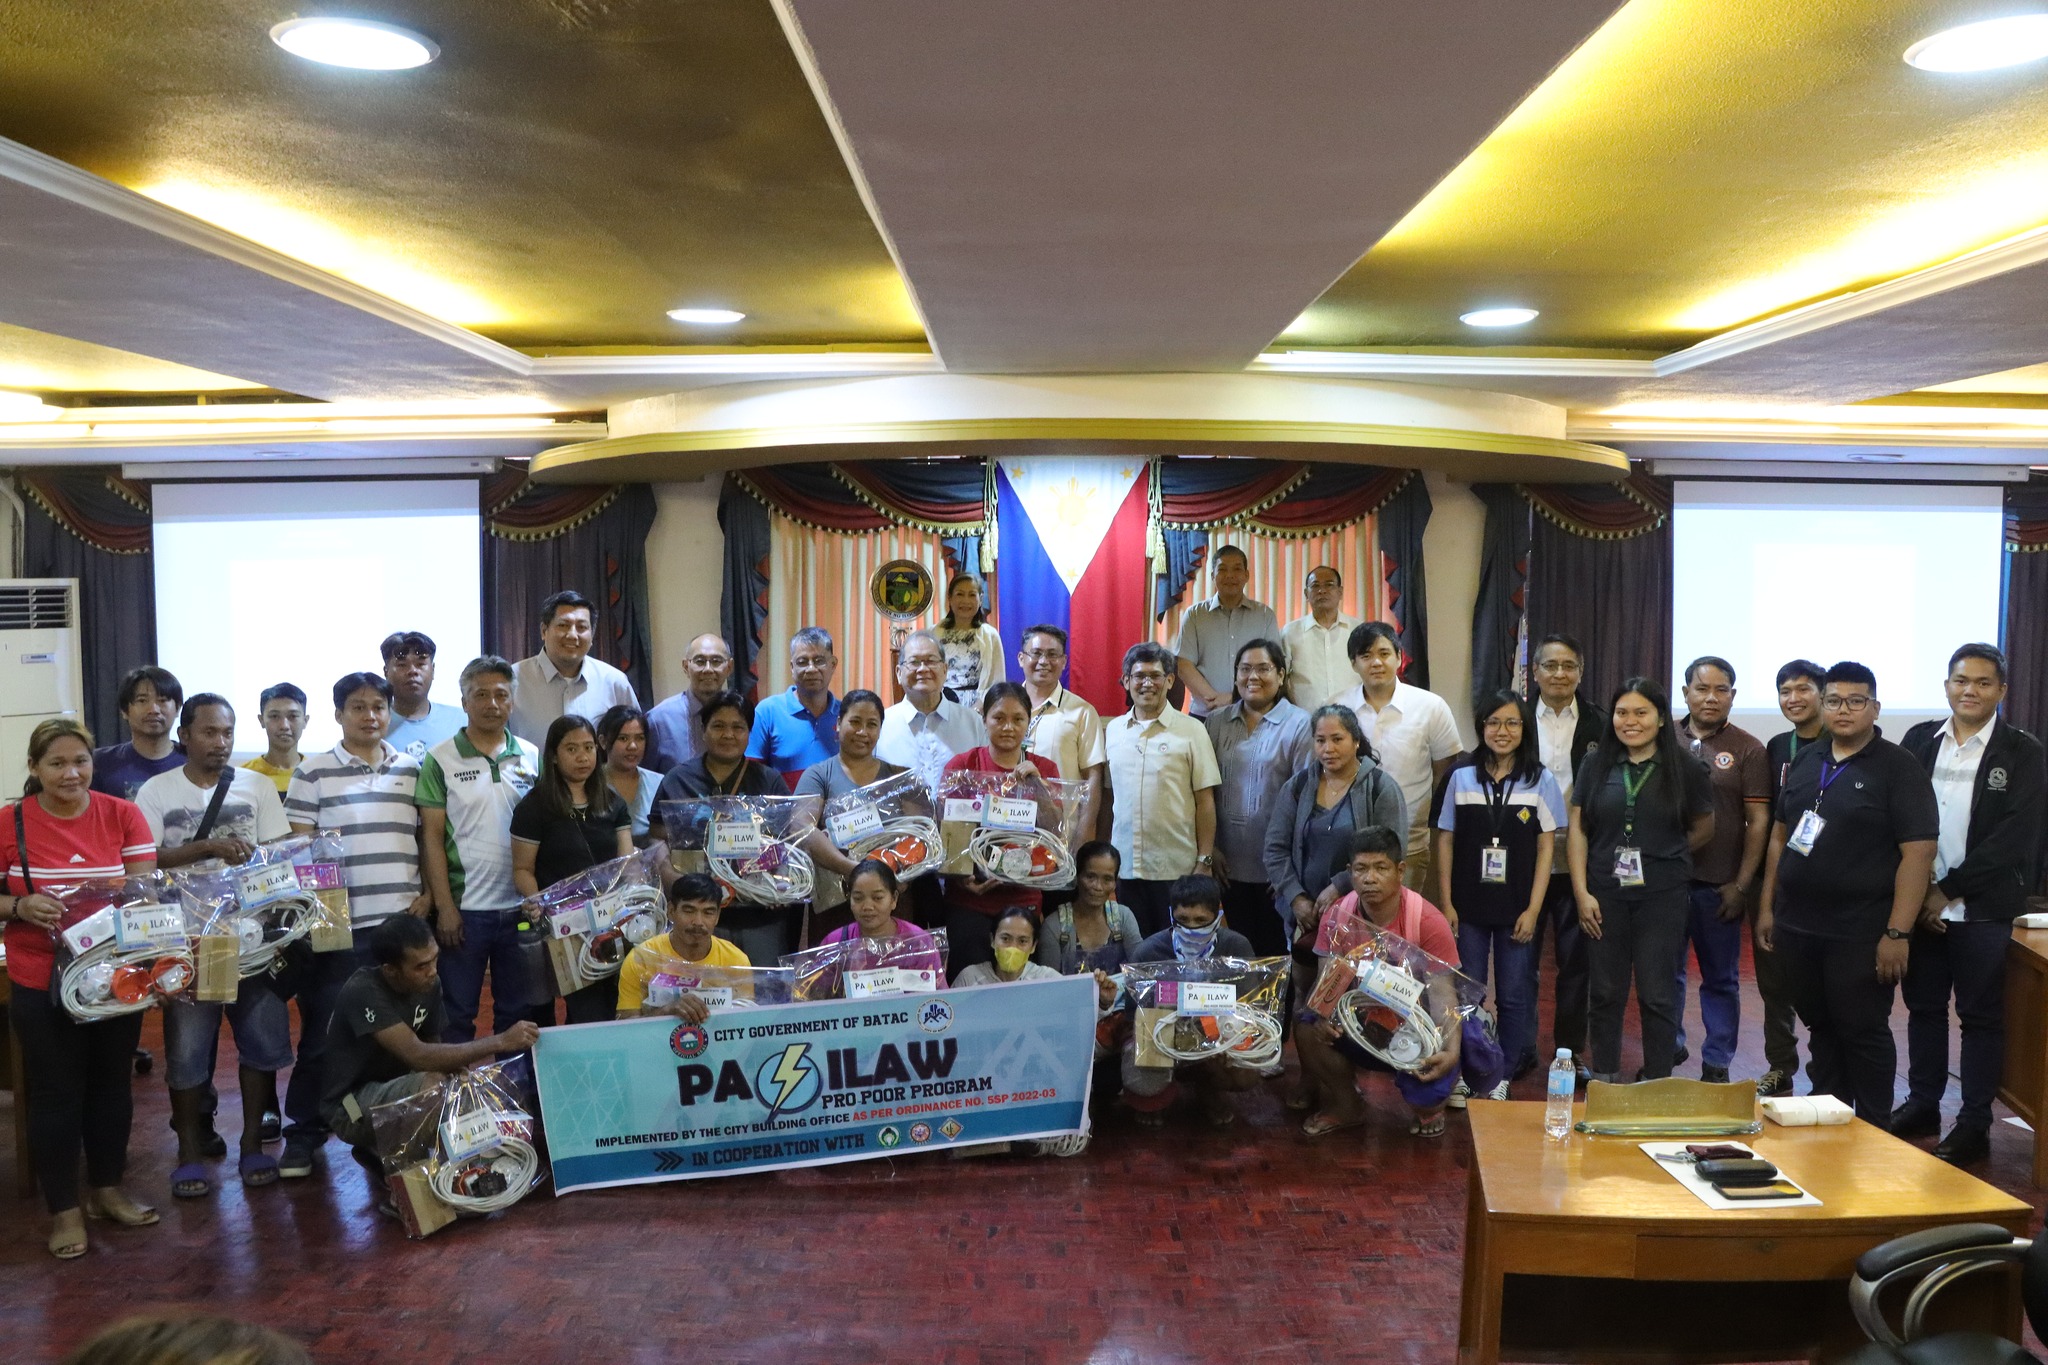 INSTITUTIONALIZED PASILAW PRO-POOR PROGRAM, LAUNCHED